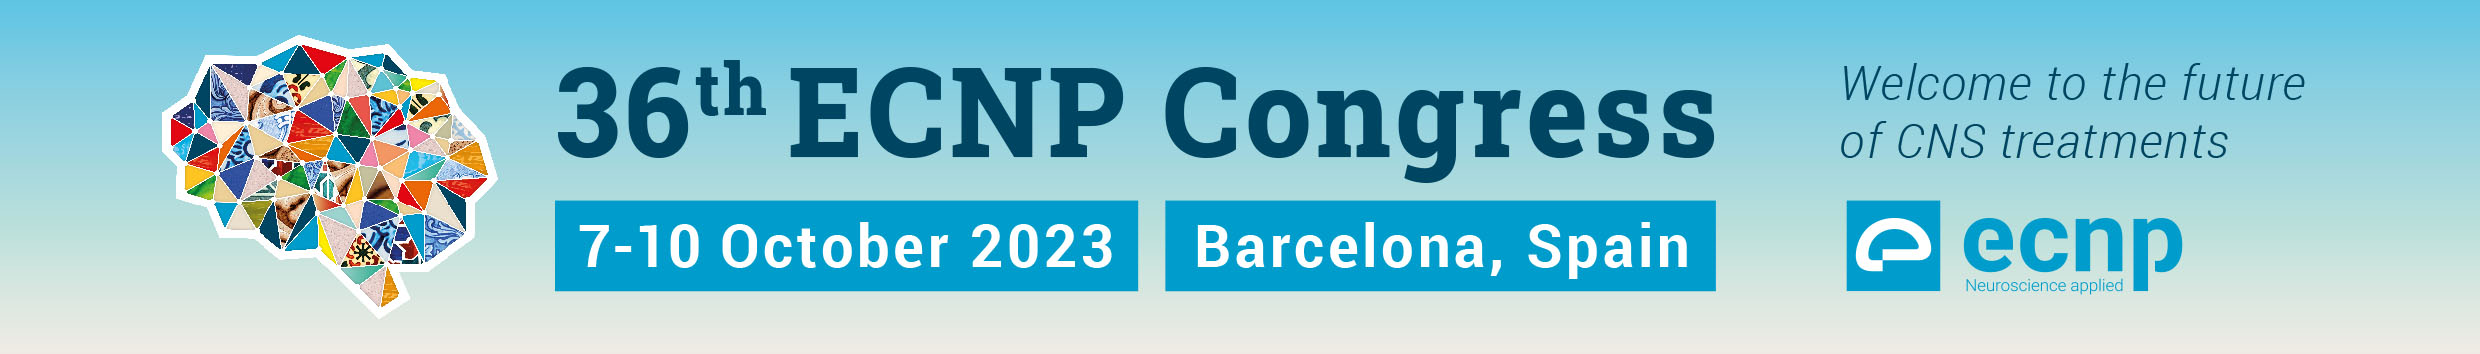 36TH ECNP CONGRESS. 7-10 October 2023. Barcelona, Spain. Welcome to the future of CNS treatments